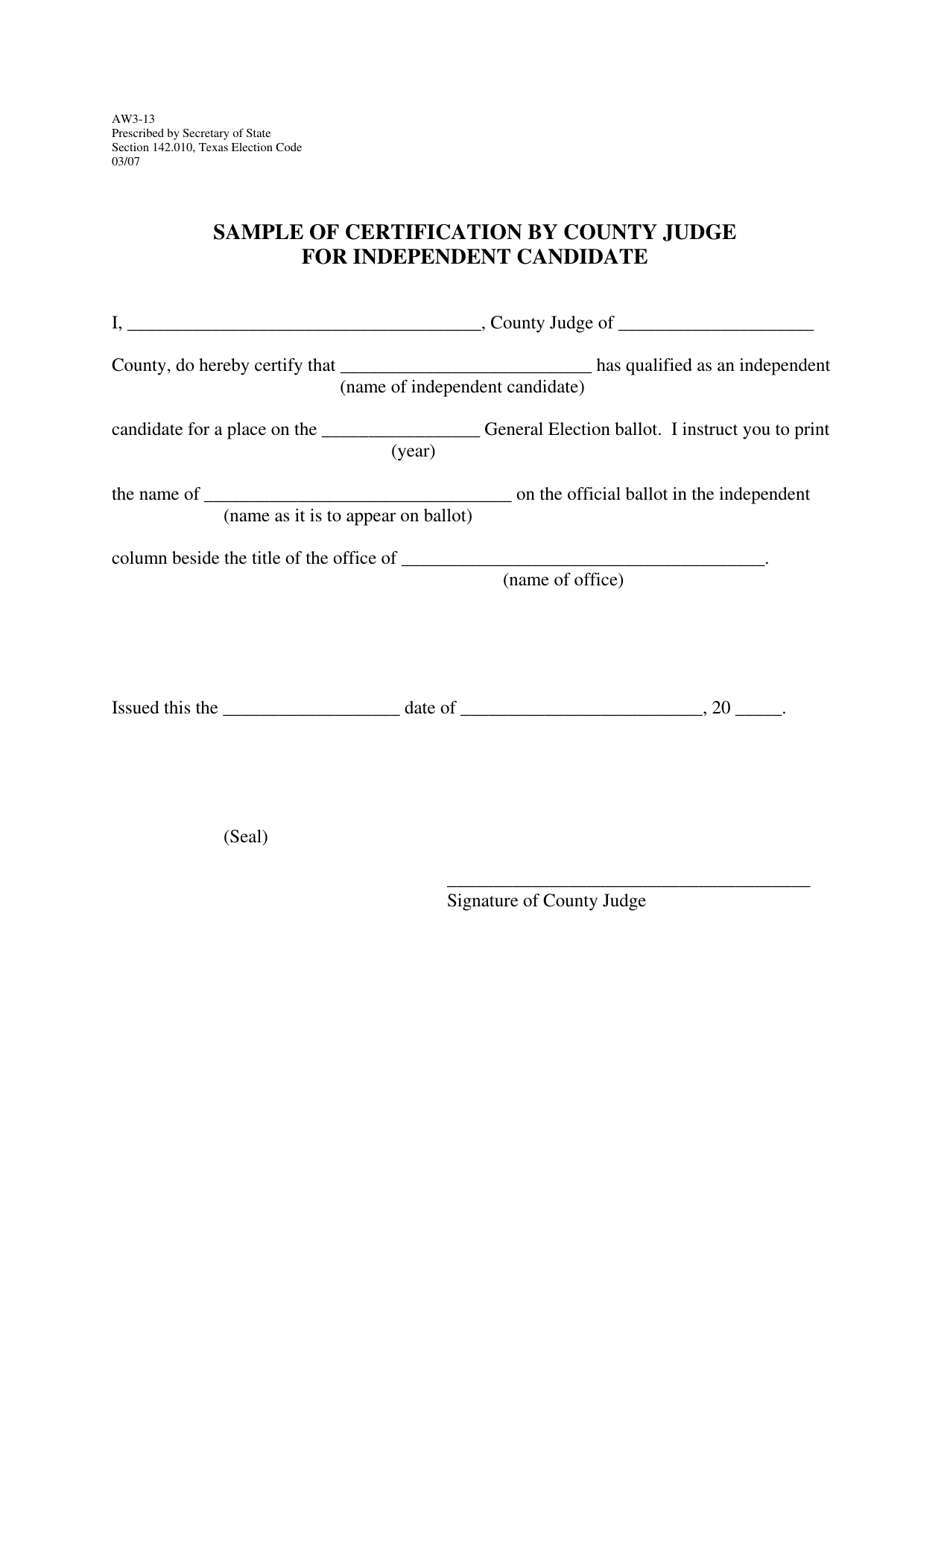 Form AW3-13 Sample of Certification by County Judge for Independent Candidate - Texas, Page 1